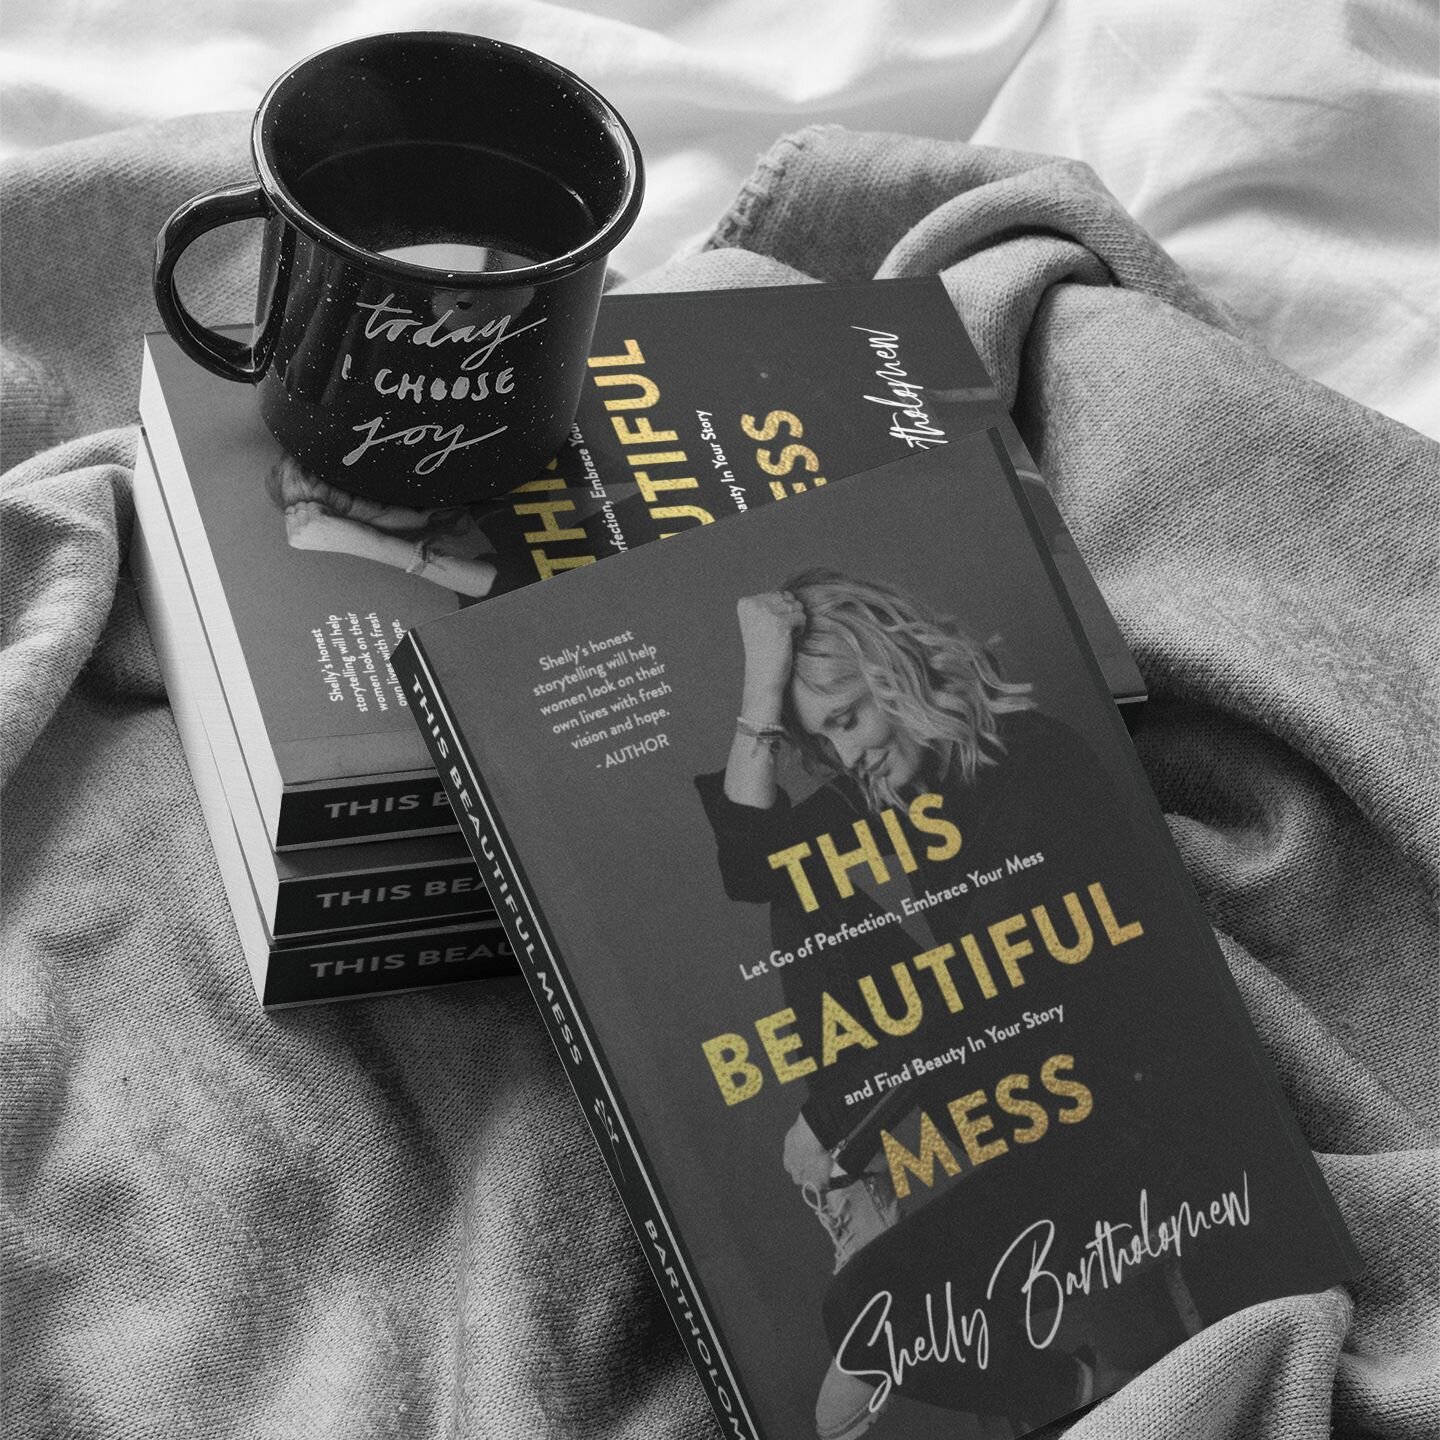 🎉Month-a-Versary🎉

This Beautiful Mess has officially been out a month! Thank you for your support. Sample chapters are available at shellybartholomew.com so be sure to head over there and start reading!